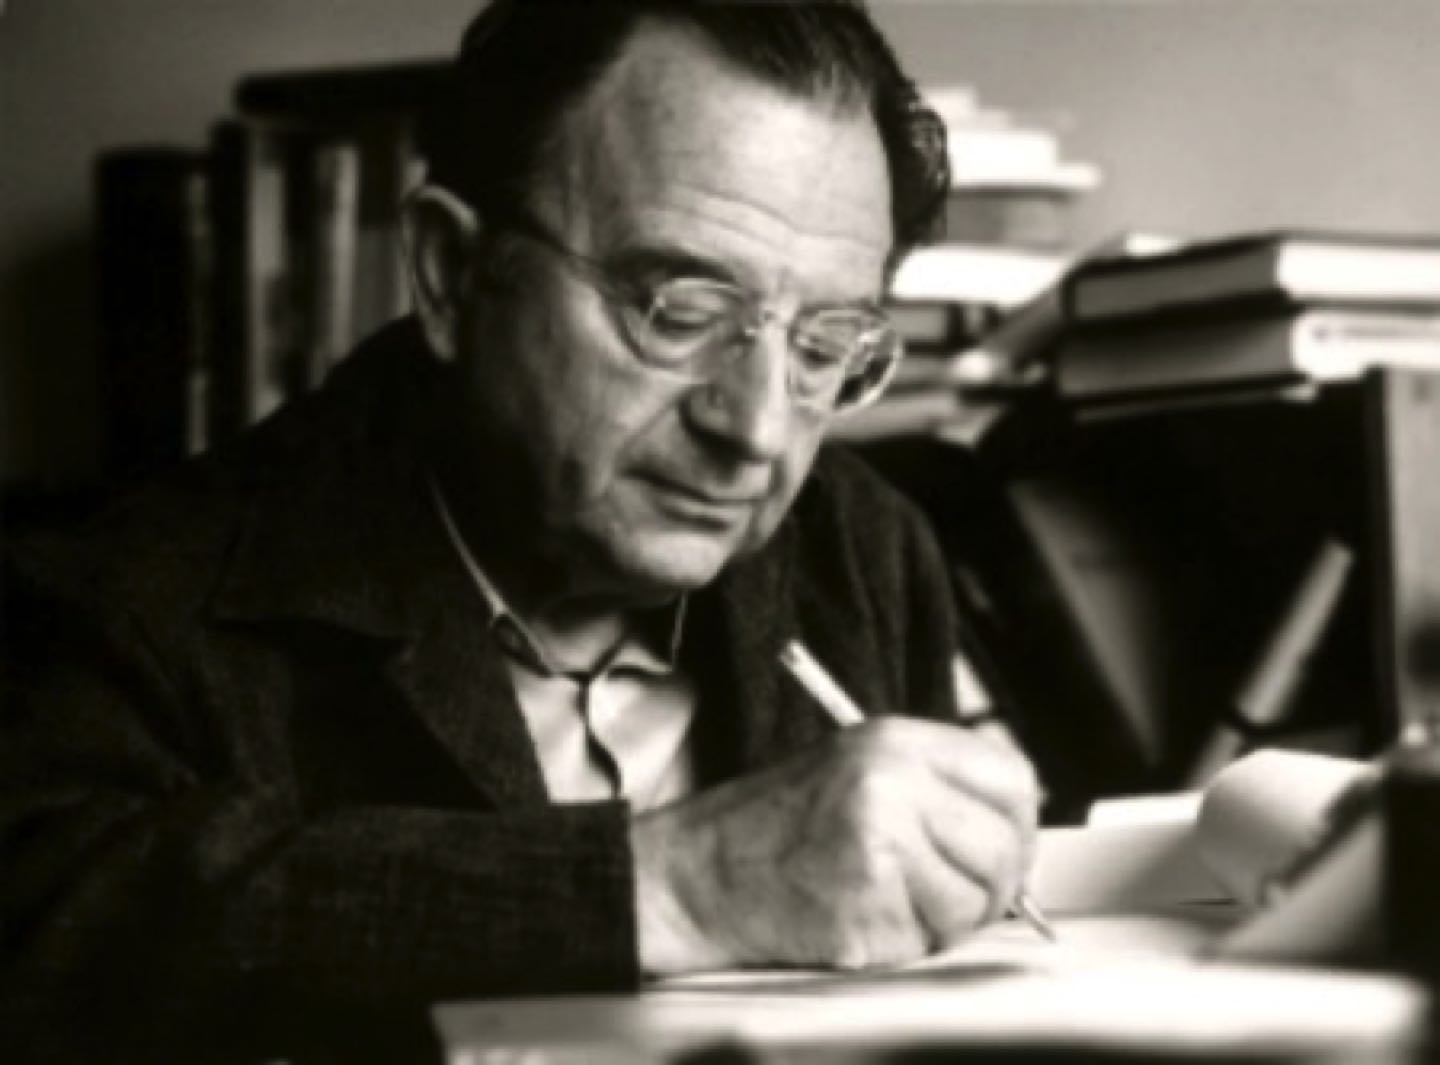 The psychologist Erich Fromm speaks of the positive changes in life